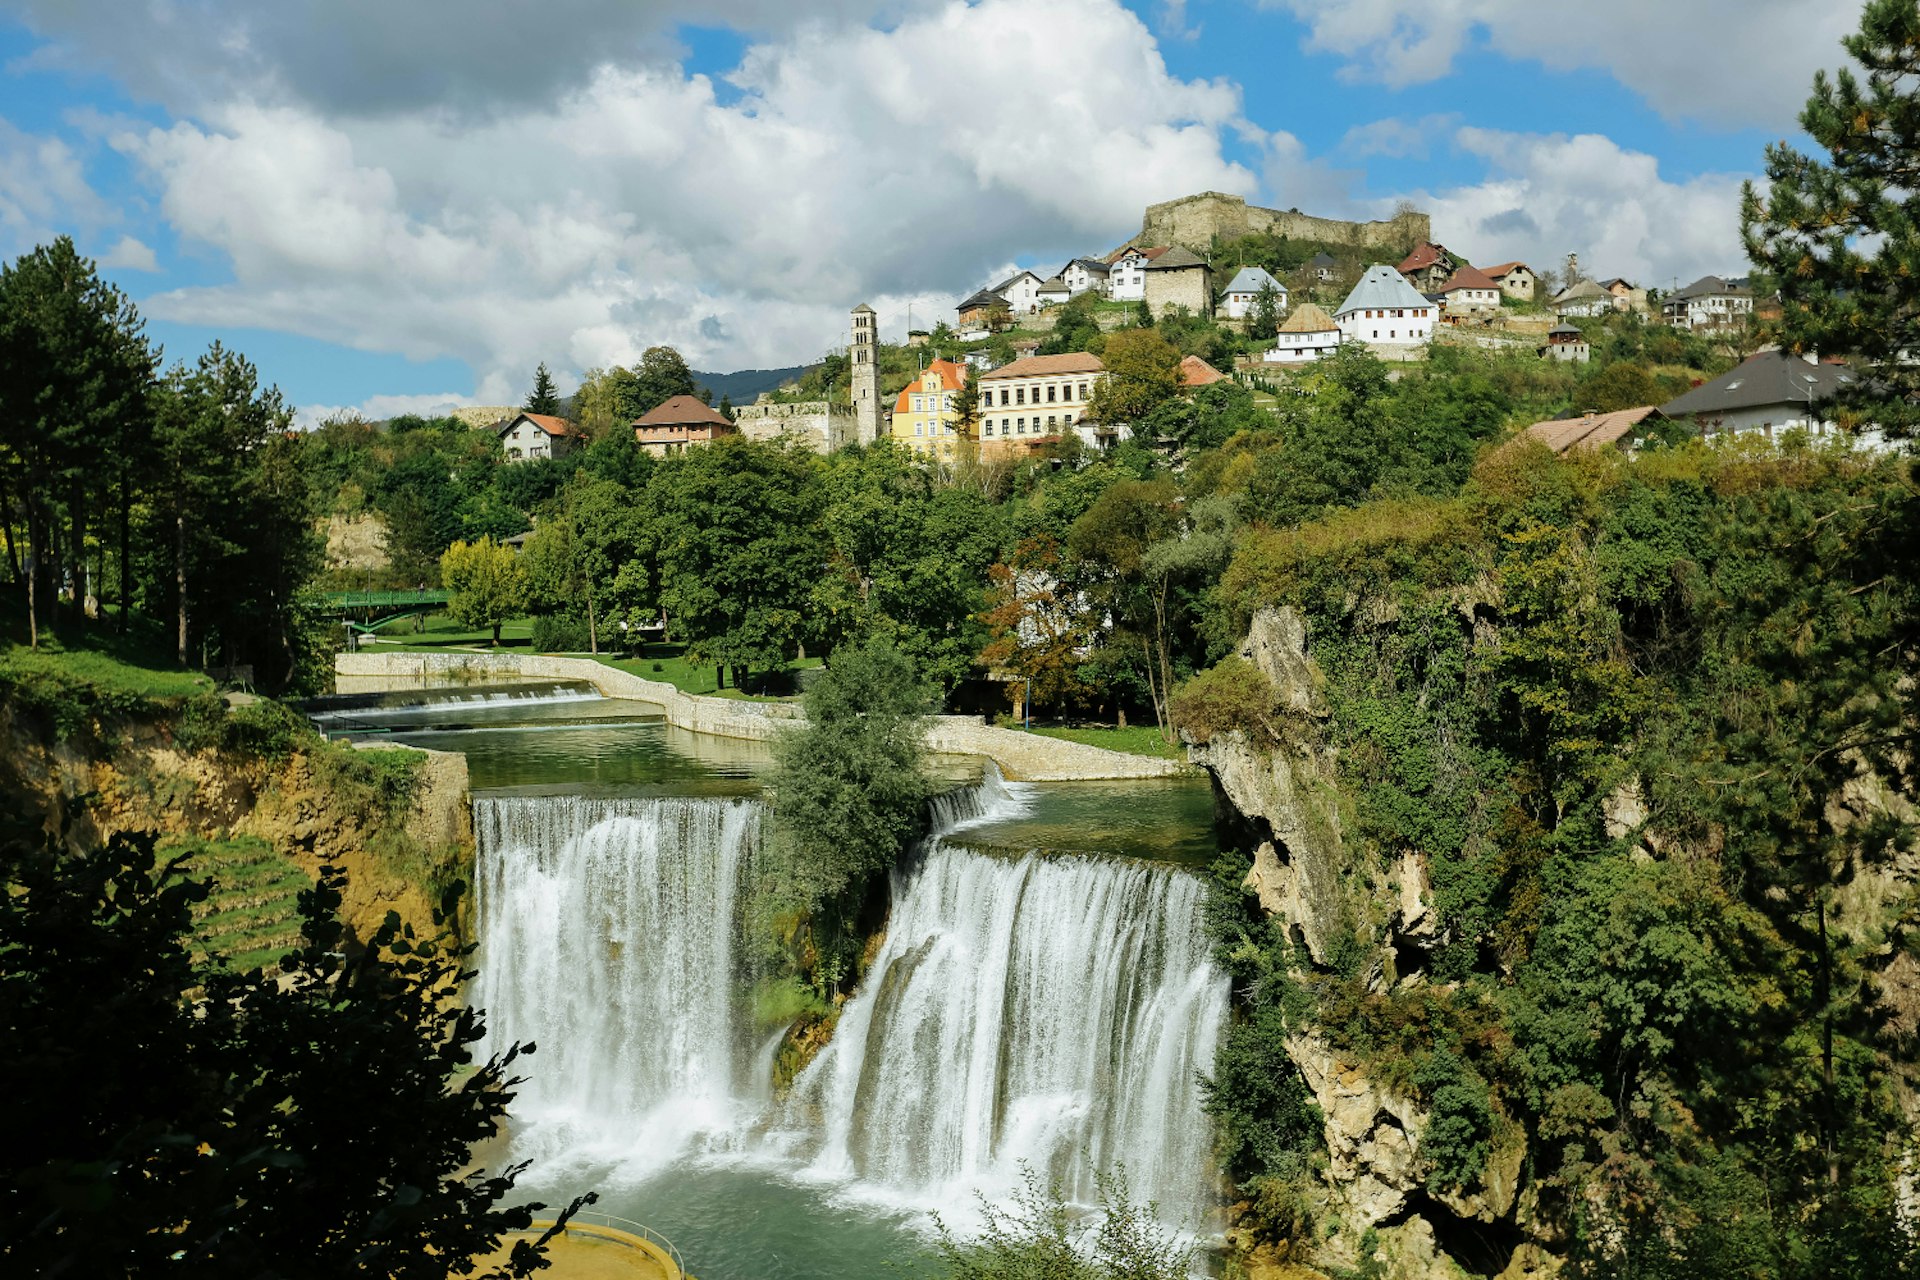 Jajce's castle and old town, above a 21m-high waterfall. Image by junlongyang / Getty